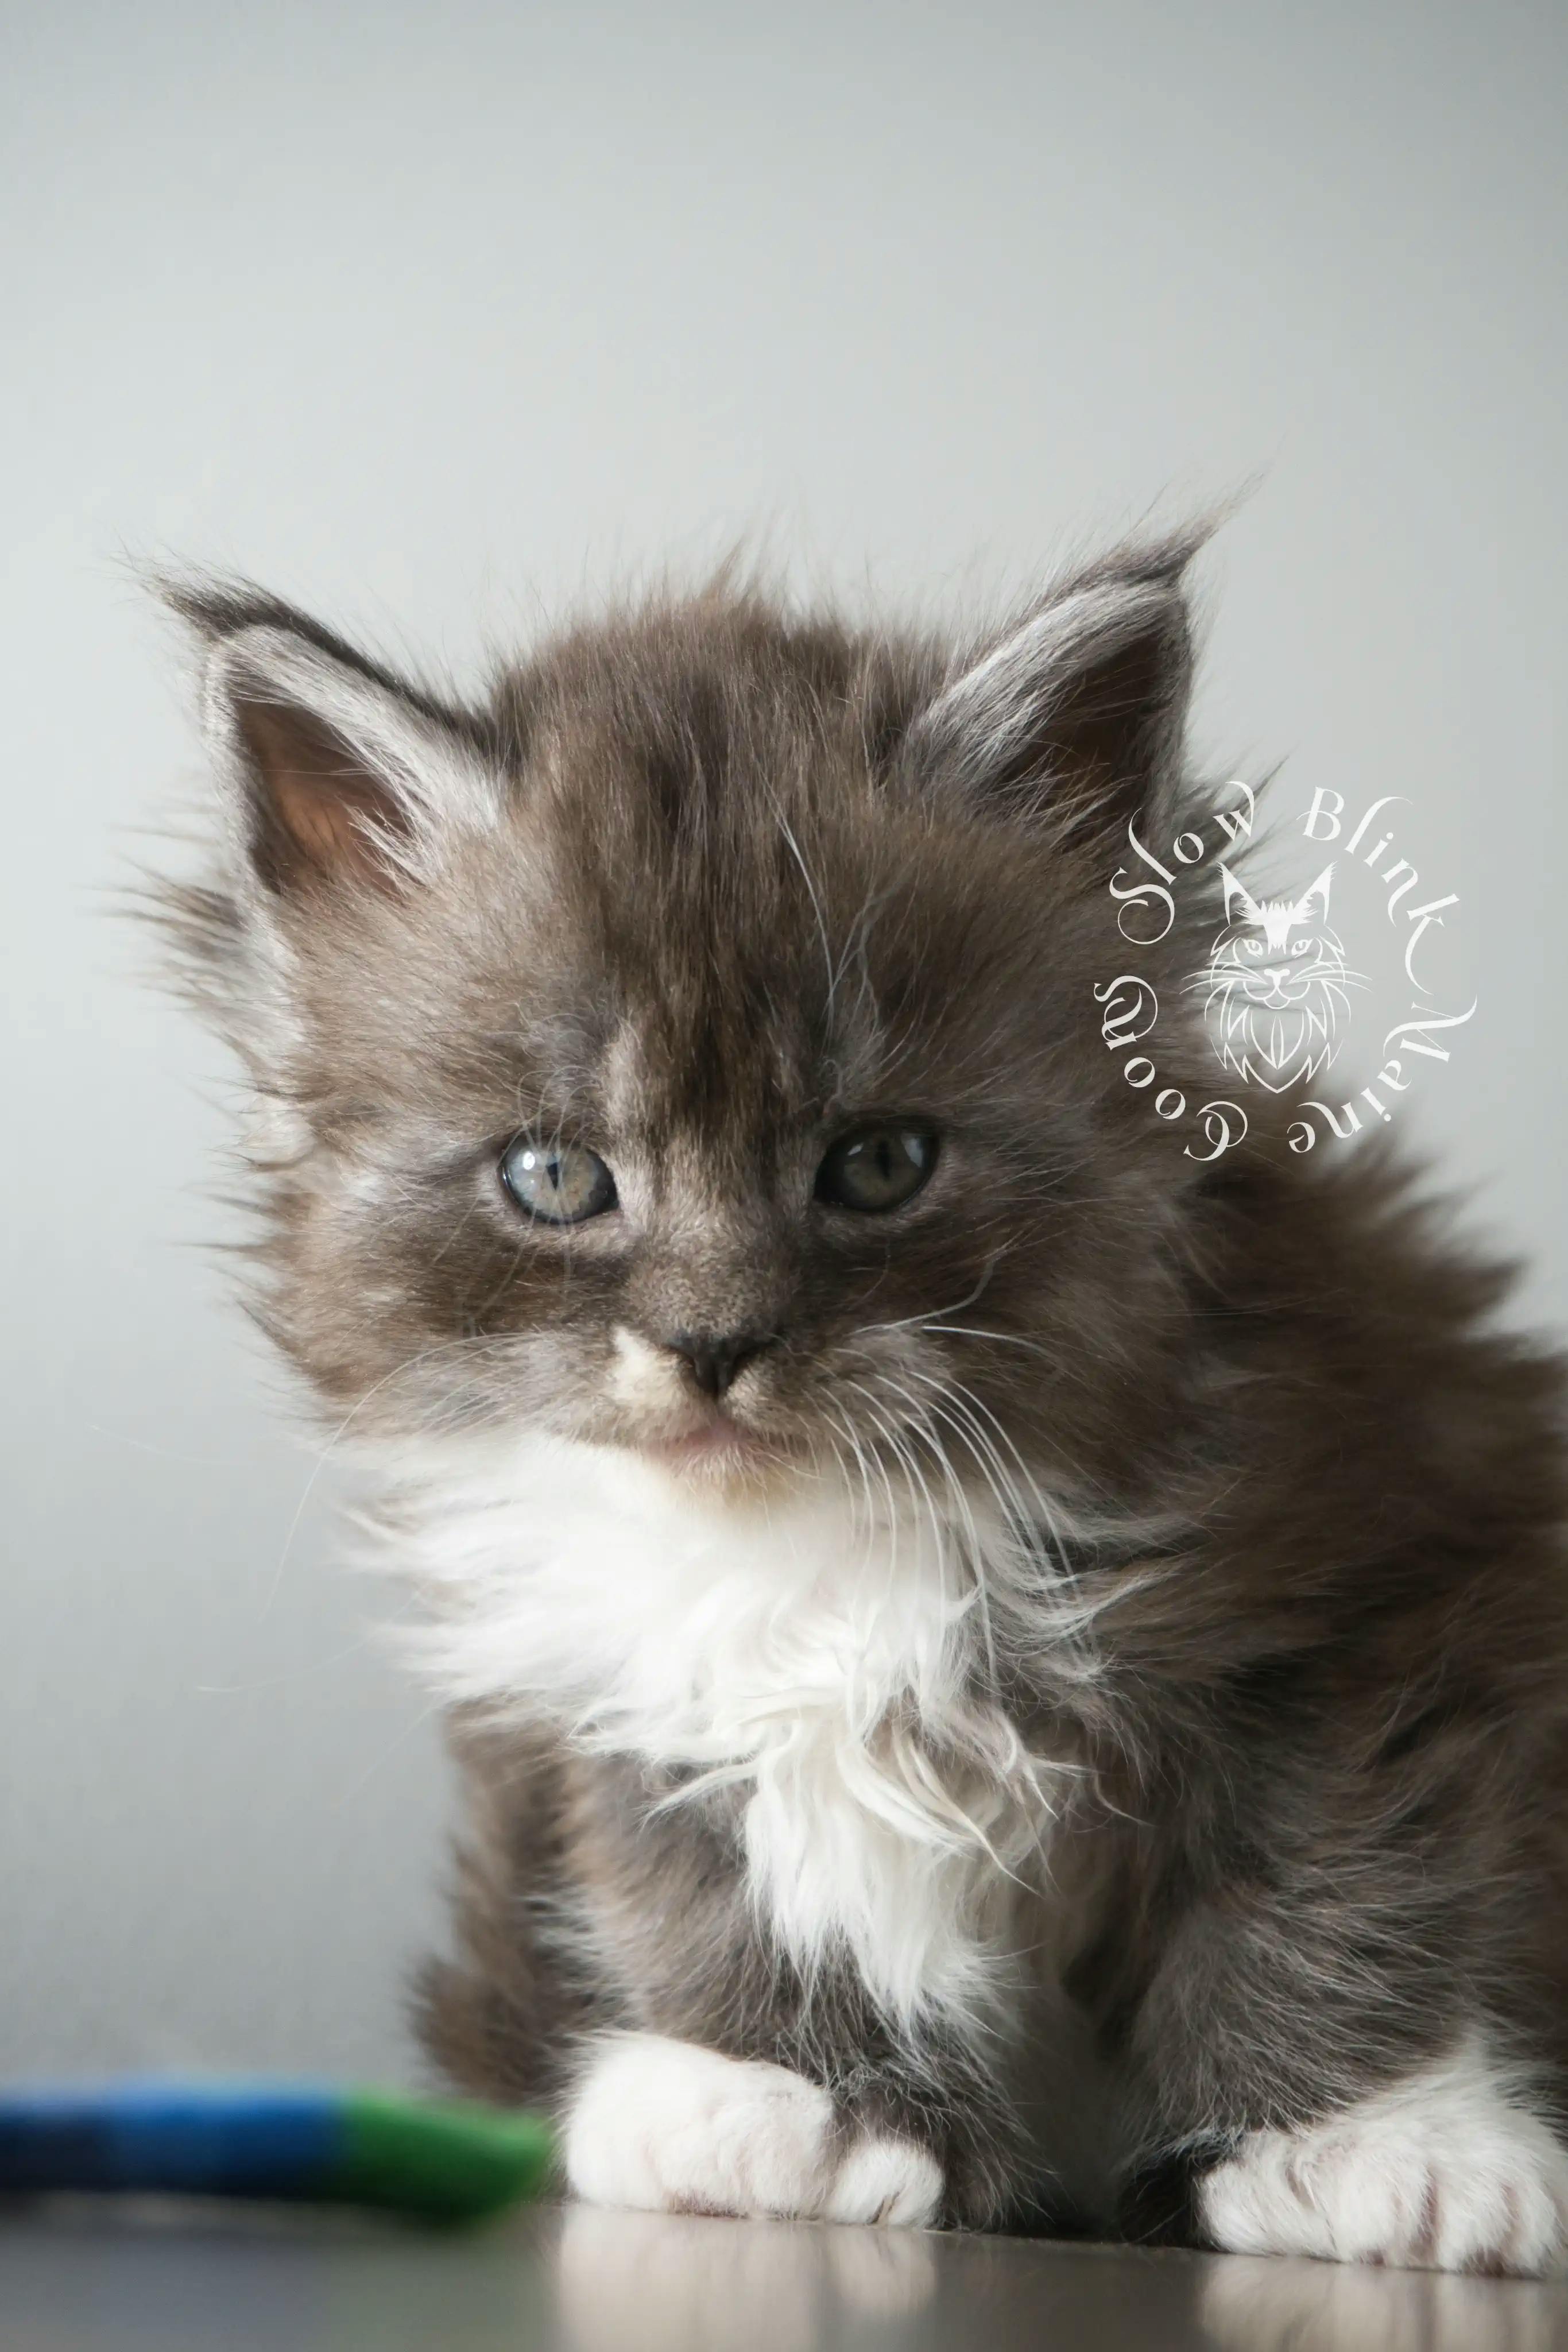 Bicolor Maine Coon Kittens > bicolor maine coon kitten | slowblinkmainecoons | ems code ns as 03 09 | 02 | 902 | 121